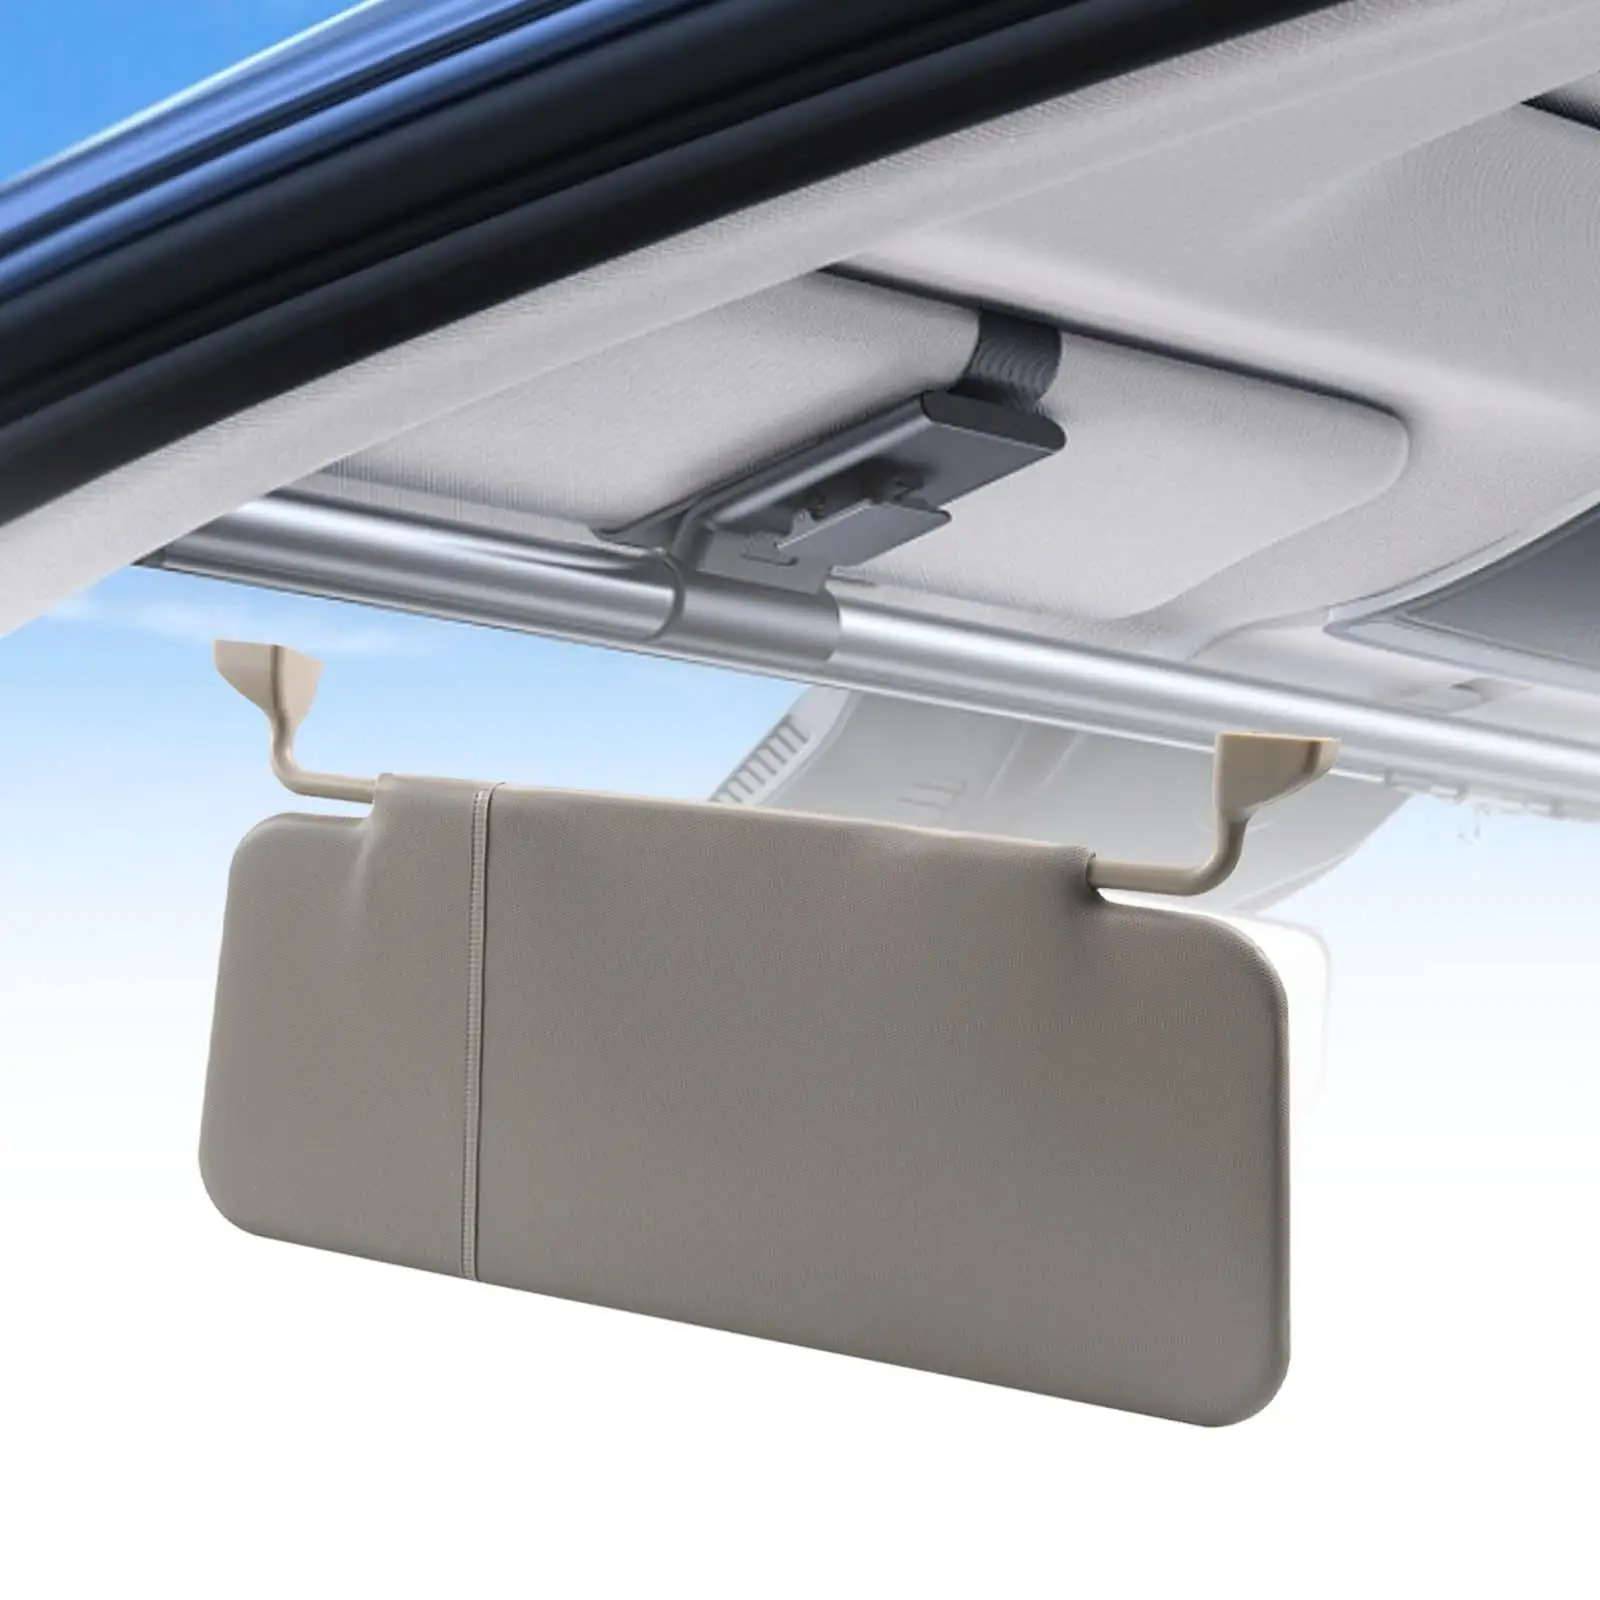 Replacement Sun Visor Shield Replaces Gray for Engineering Vehicle Vehicle Spare Parts Good Performance Easily Install